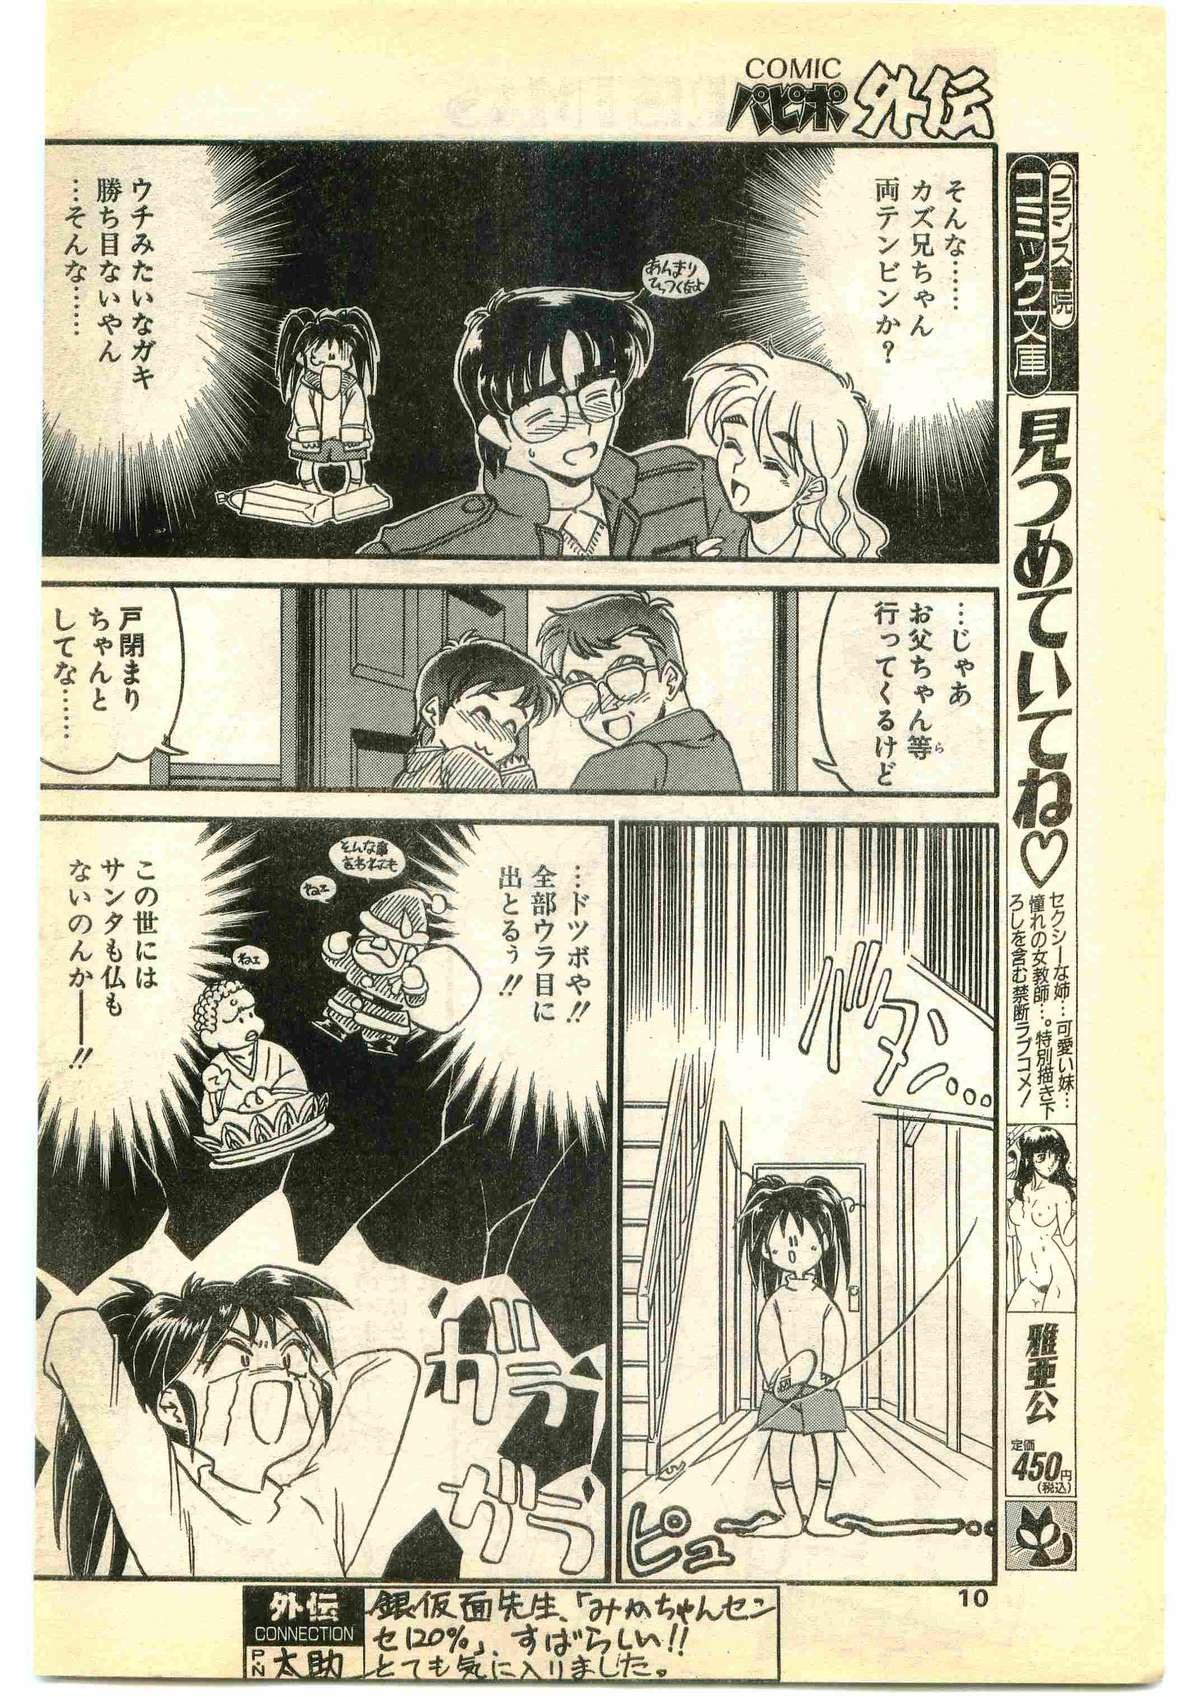 Animated COMIC Papipo Gaiden 1995-01 Teamskeet - Page 10